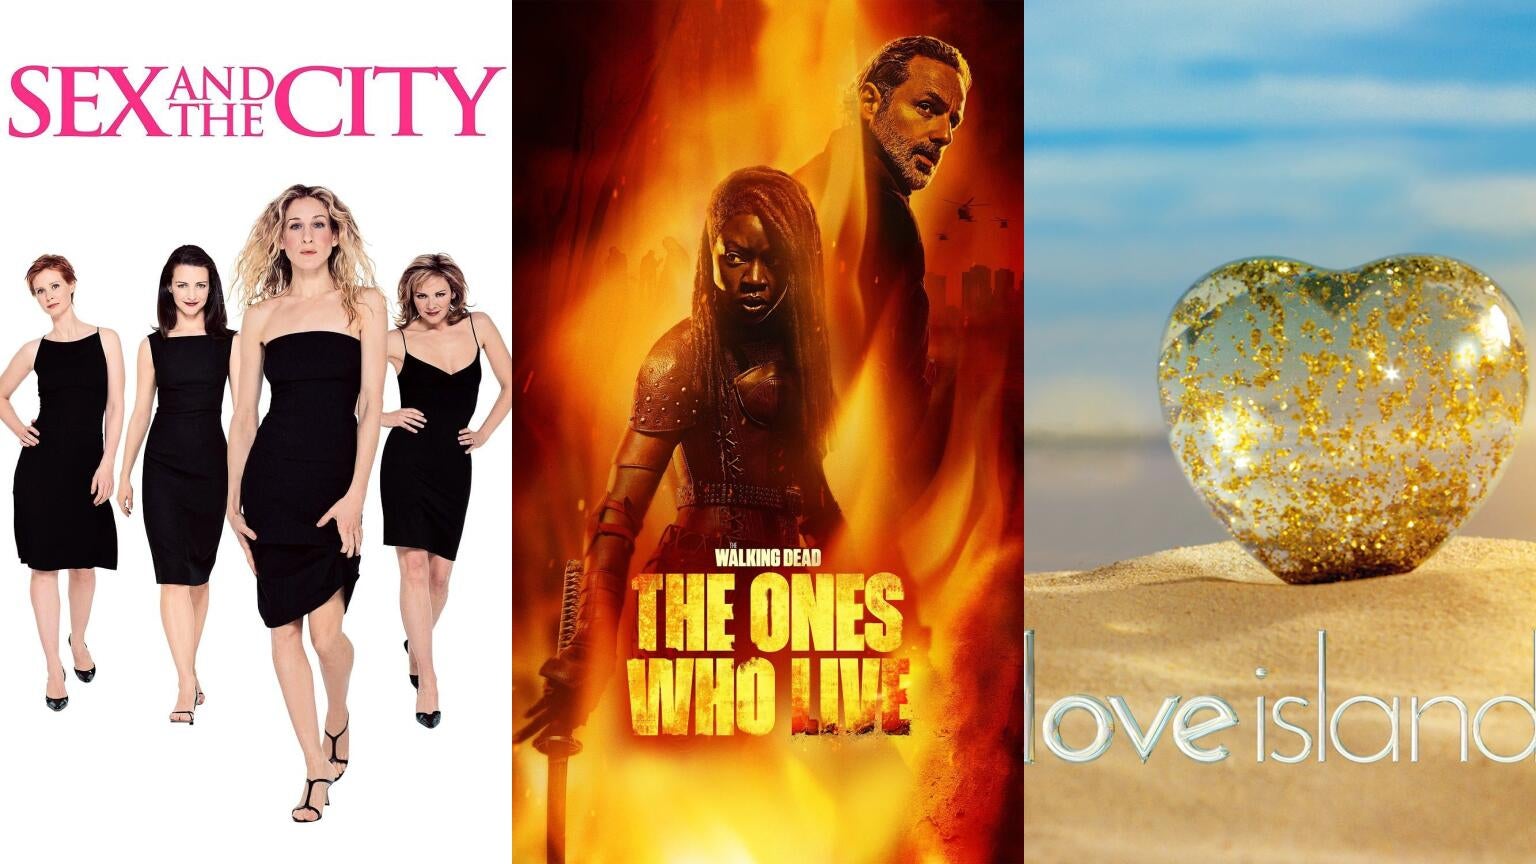 Posters for "Sex and the City," "The Walking Dead: The Ones Who Live," and the U.K. version of "Love Island"